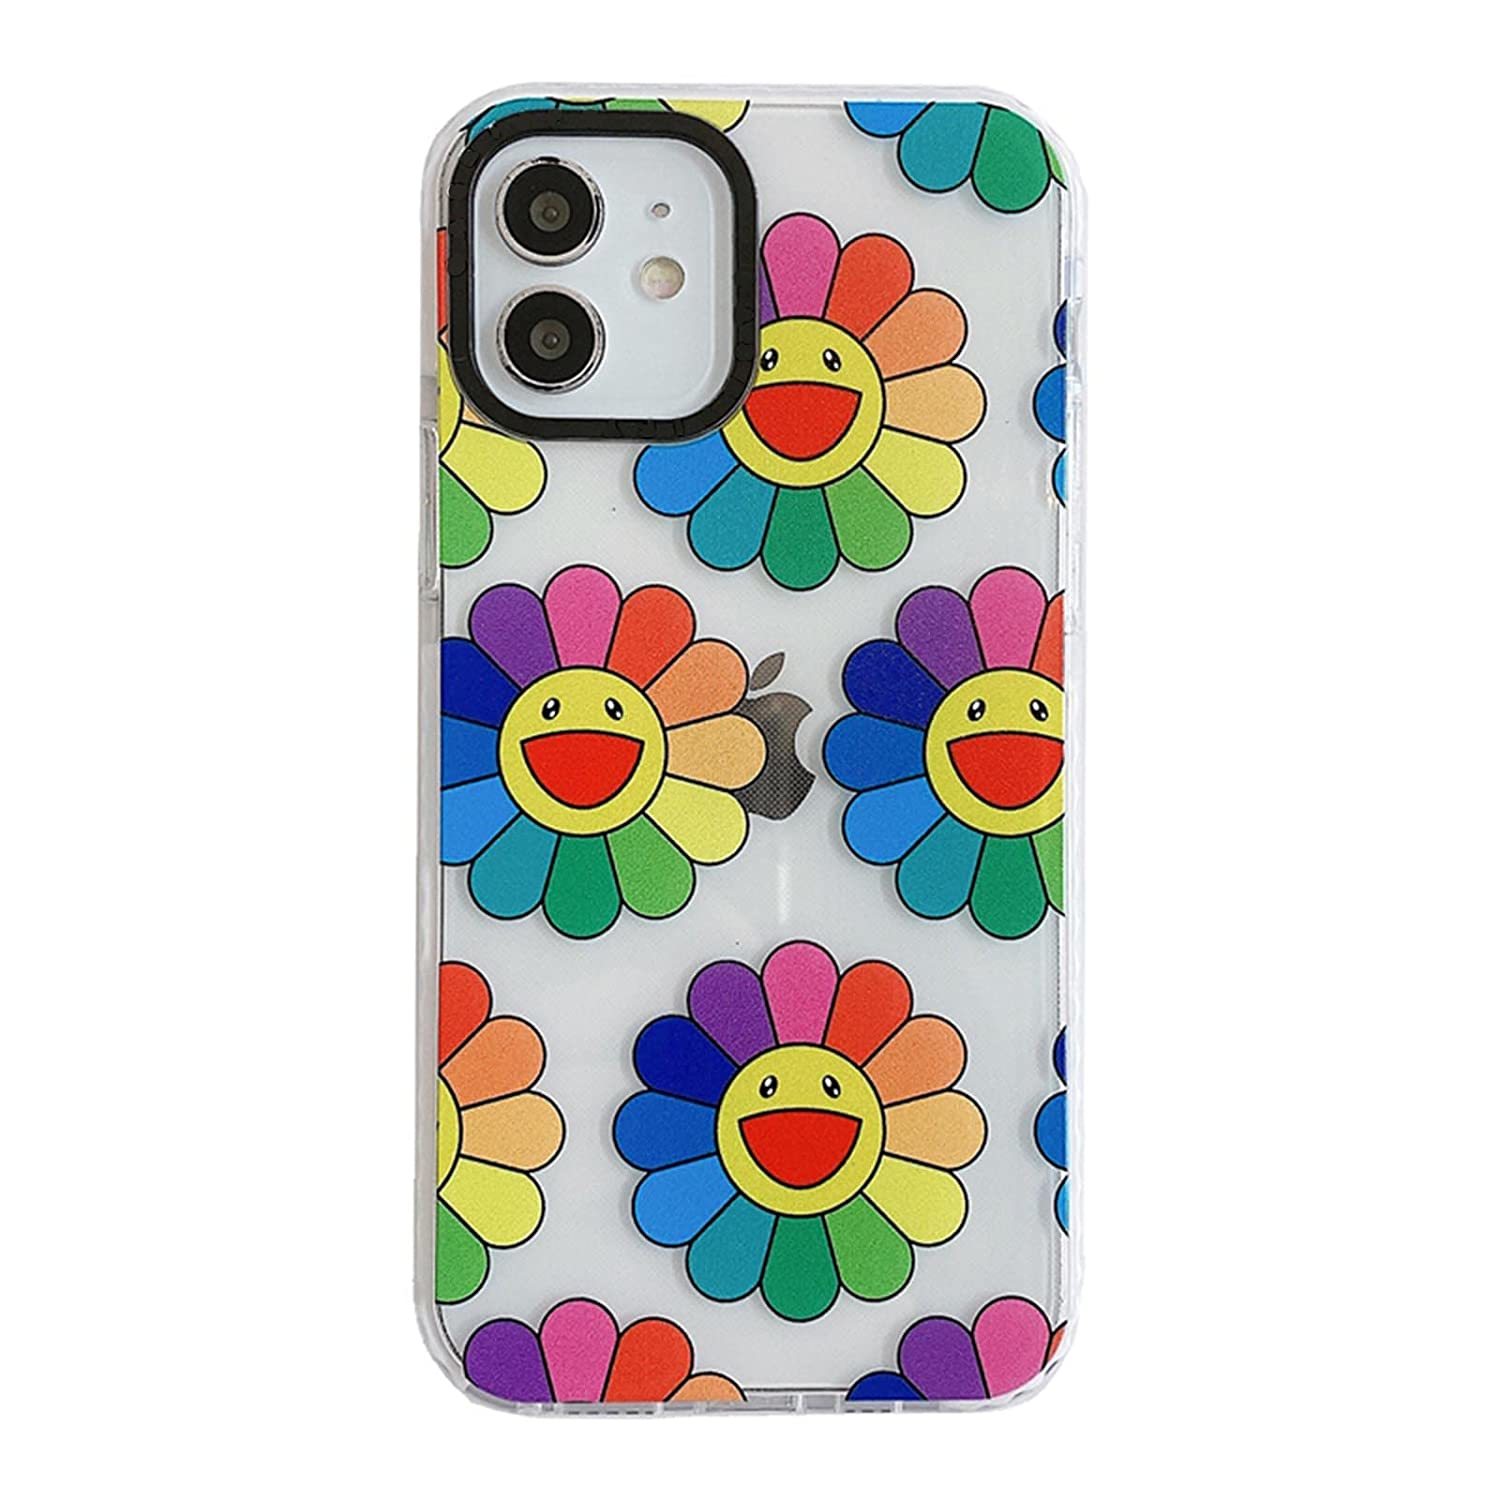 Colorful Smiley Face Sunflower Floral Flower Pattern For Iphone 11 Case Cute Rai